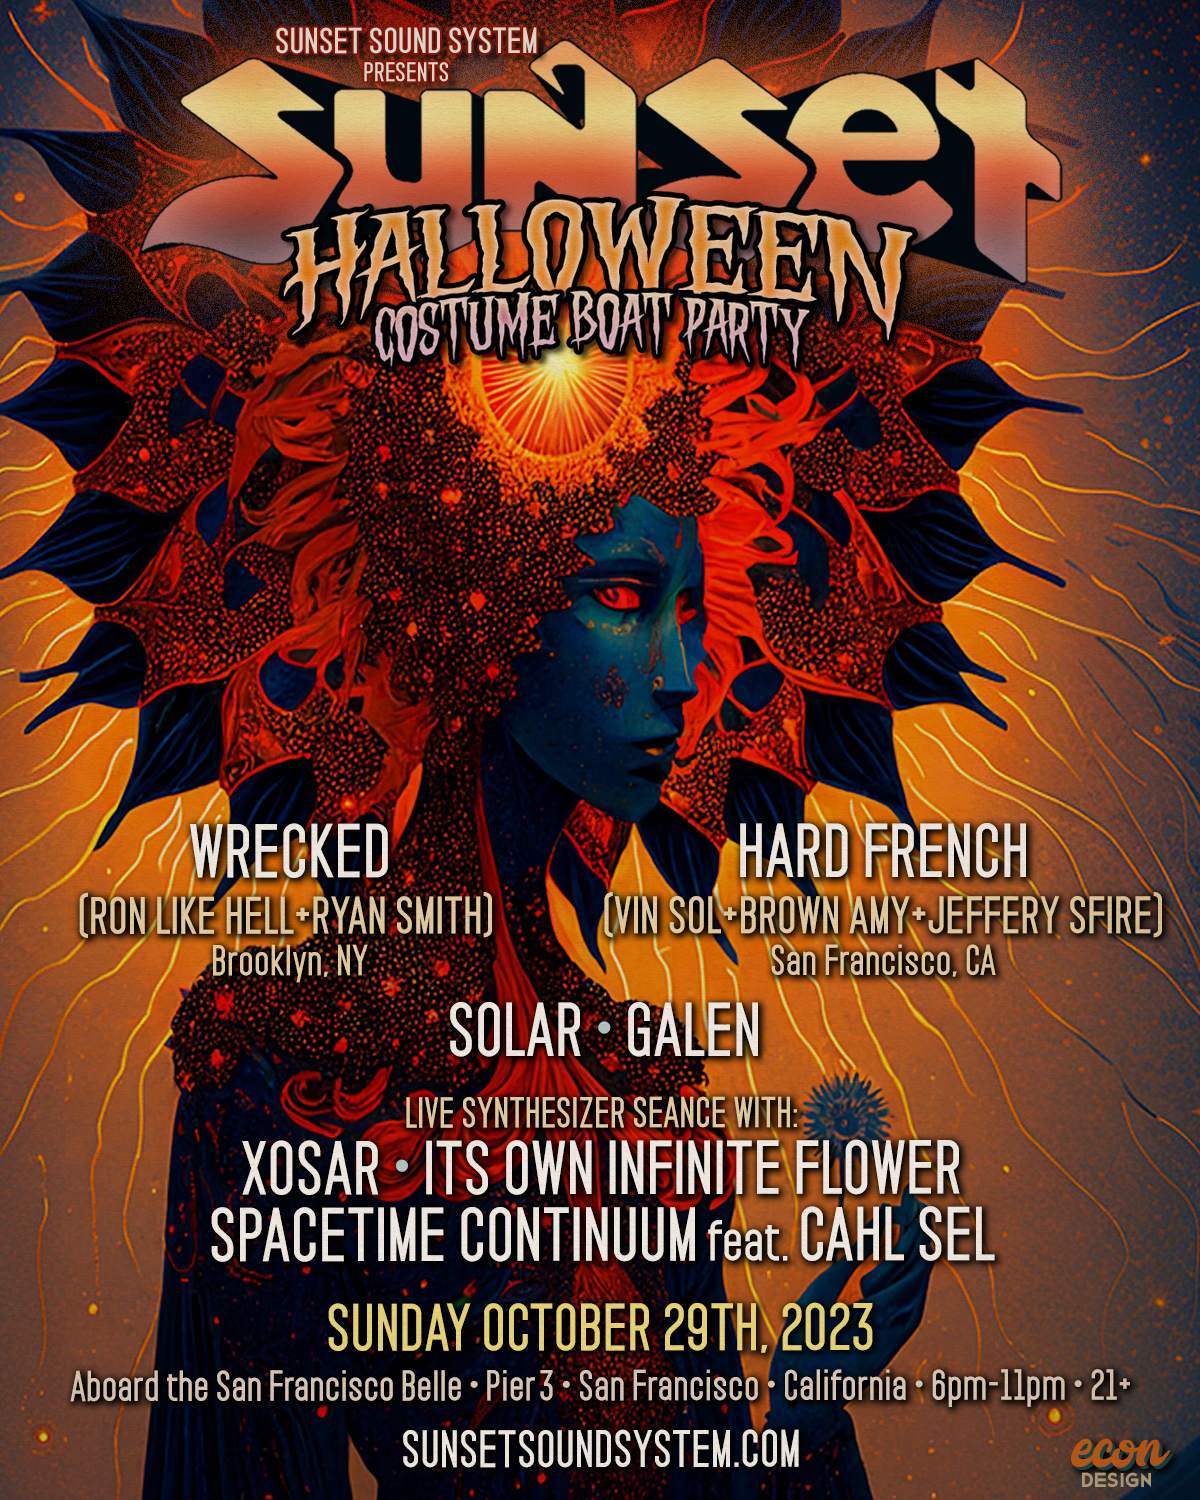 Sunset Sound System Full Moon Halloween Costume Boat + After-Party 2023 - Página frontal